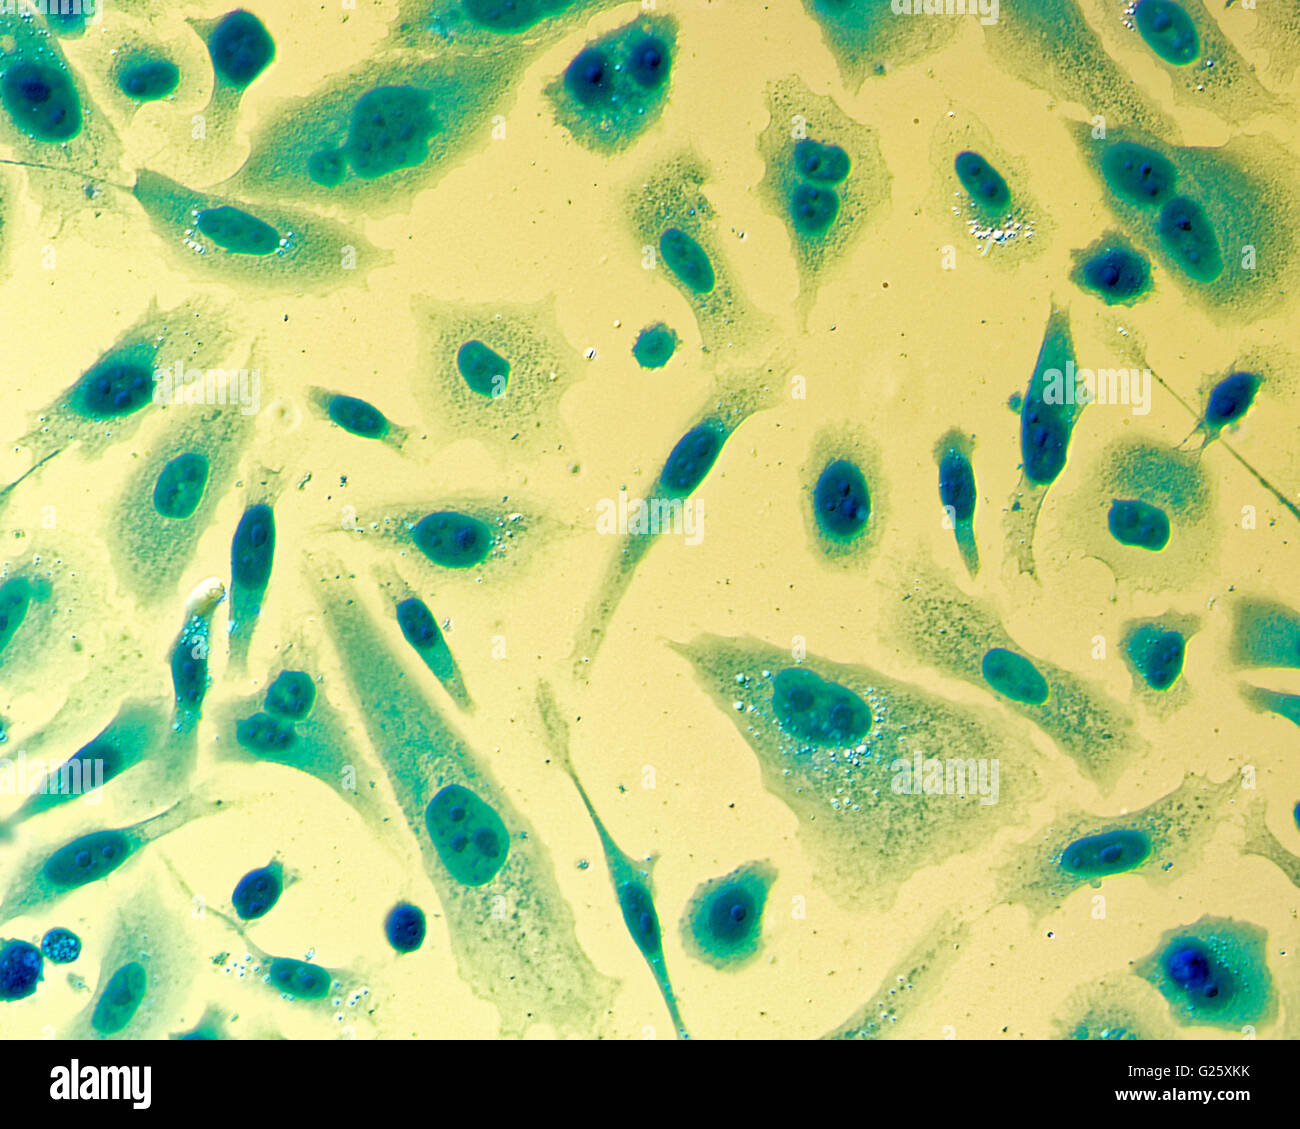 PC-3 human prostate cancer cells, stained with Coomassie blue, under differencial interference contrast microscope. Stock Photo